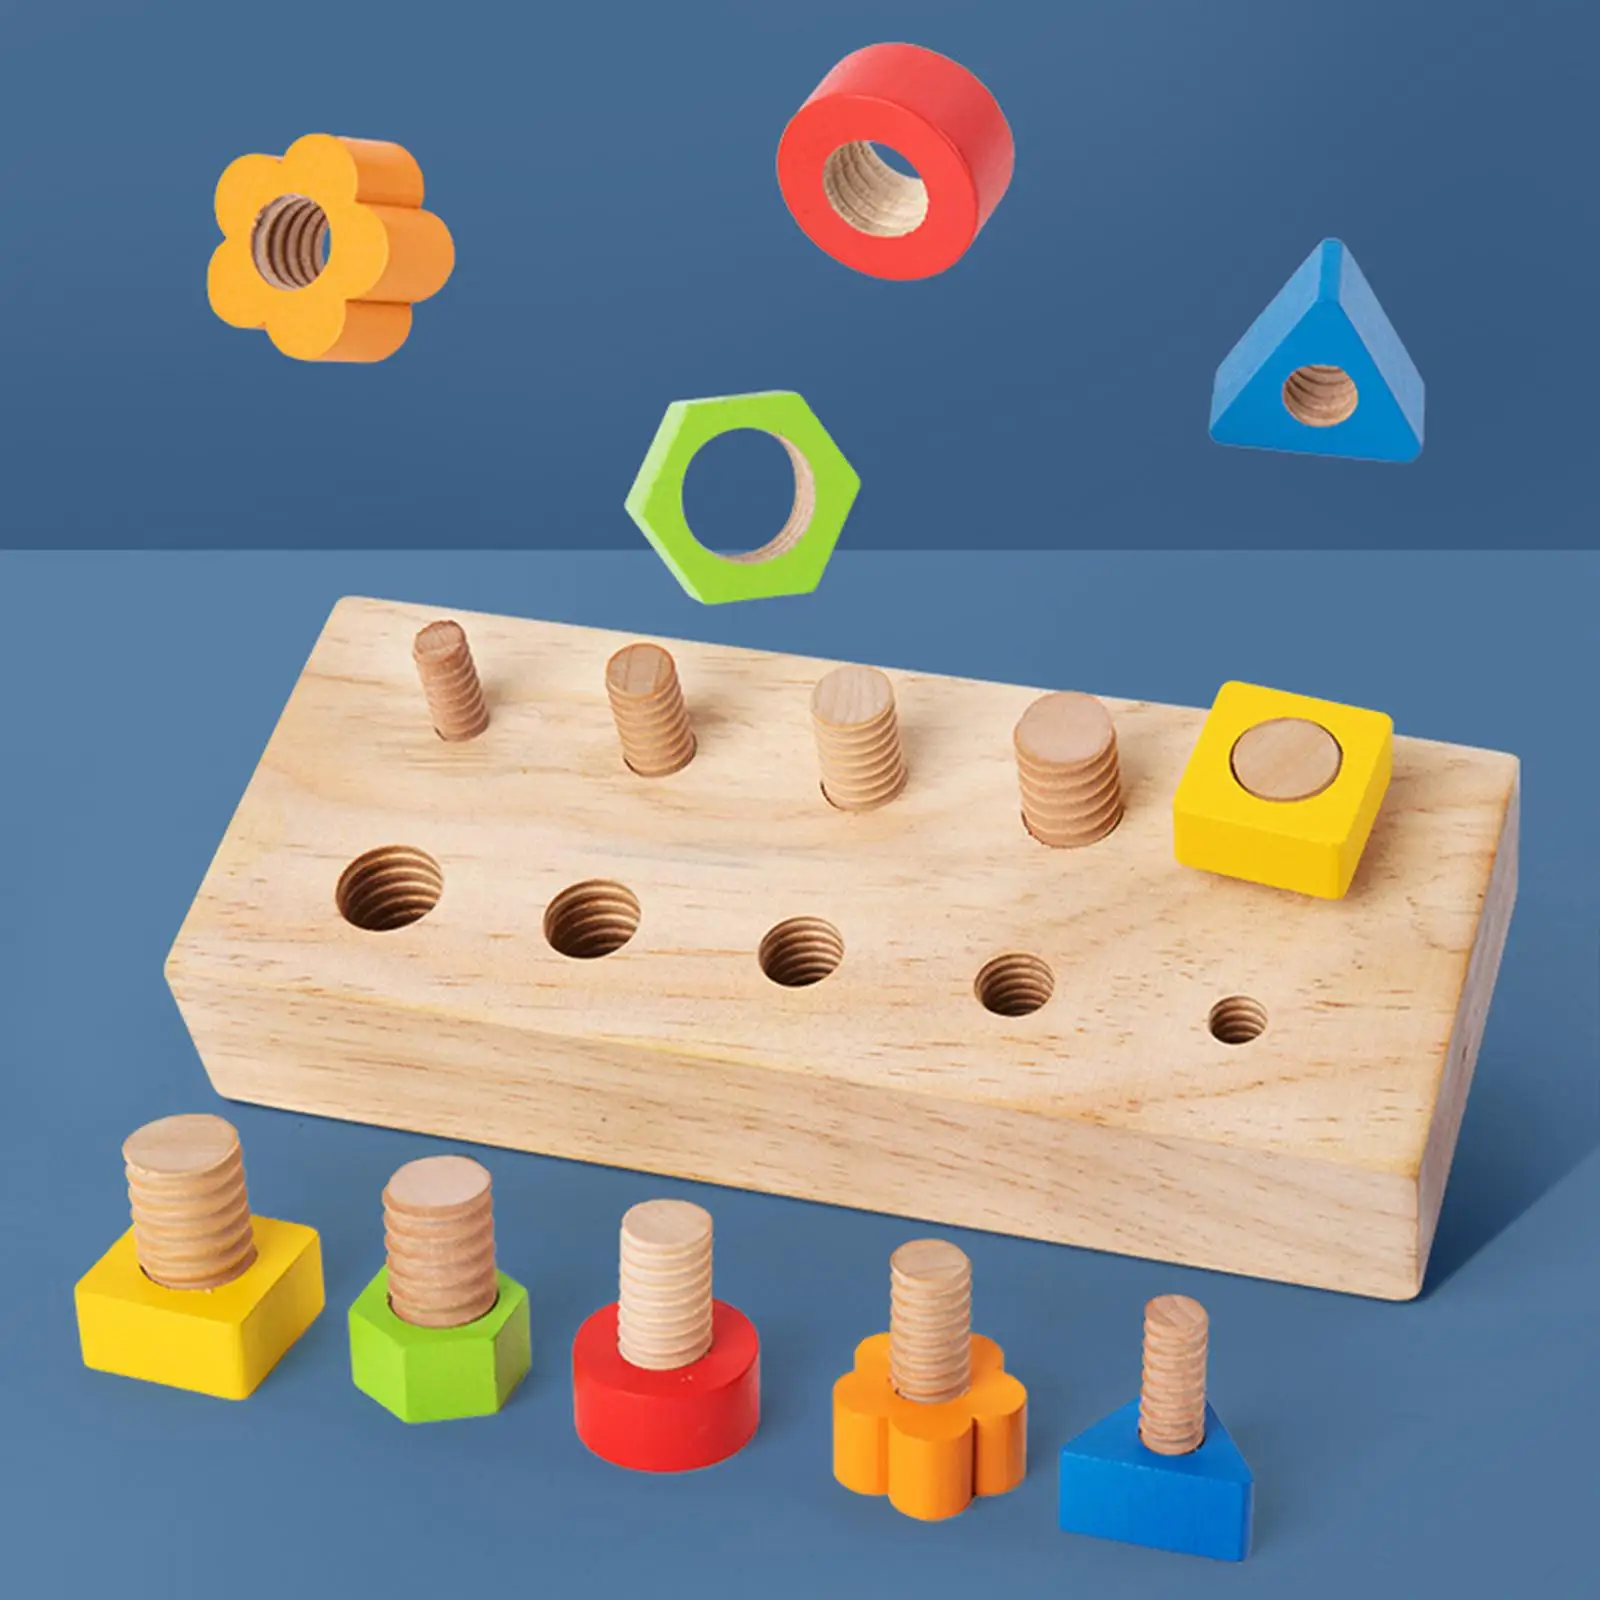 Montessori Wood Nuts and Bolts Board  Material Color &  , Developing Brain Power Develop Fine  Kids Gifts